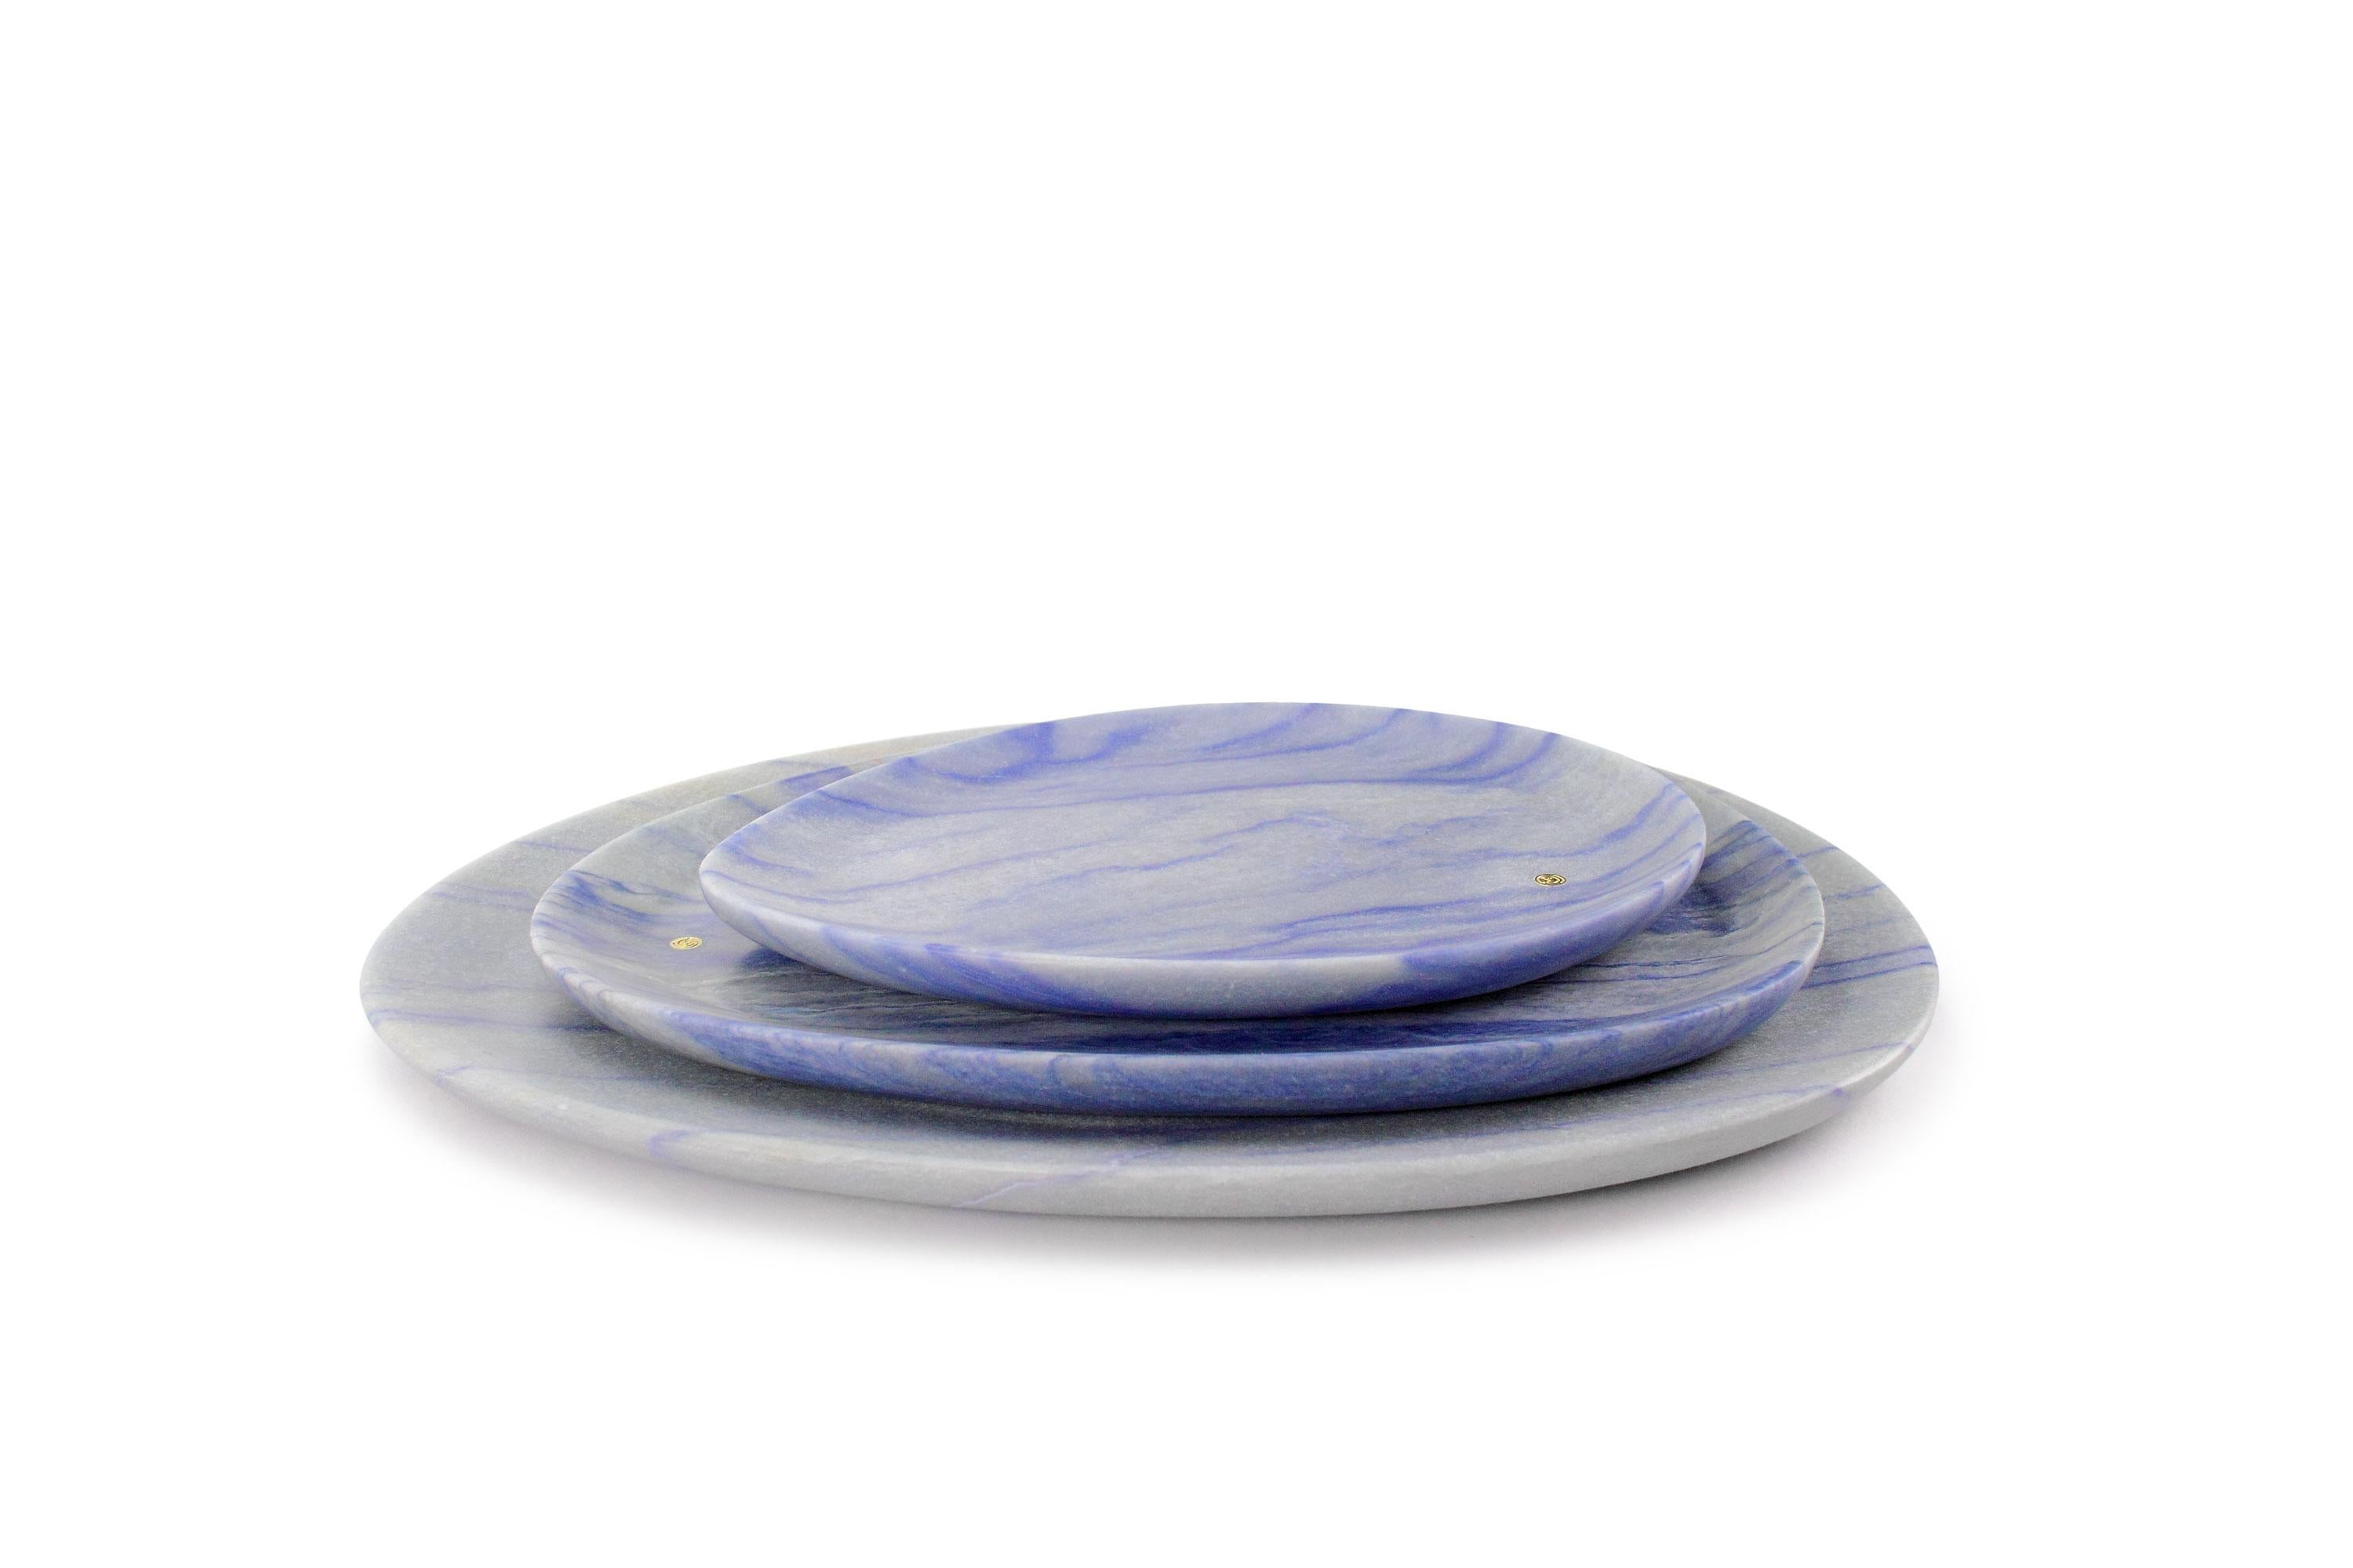 Hand carved presentation plates in semi-precious quartzite Azul Macaubas.
Multiple use as plates, platters and placers. 

Dimensions: Small - L24 W20 H1.8 cm, Medium - L30 W28 H1.8 cm and Big - L36 W35 H1.8 cm.
Available in different marbles, onyx